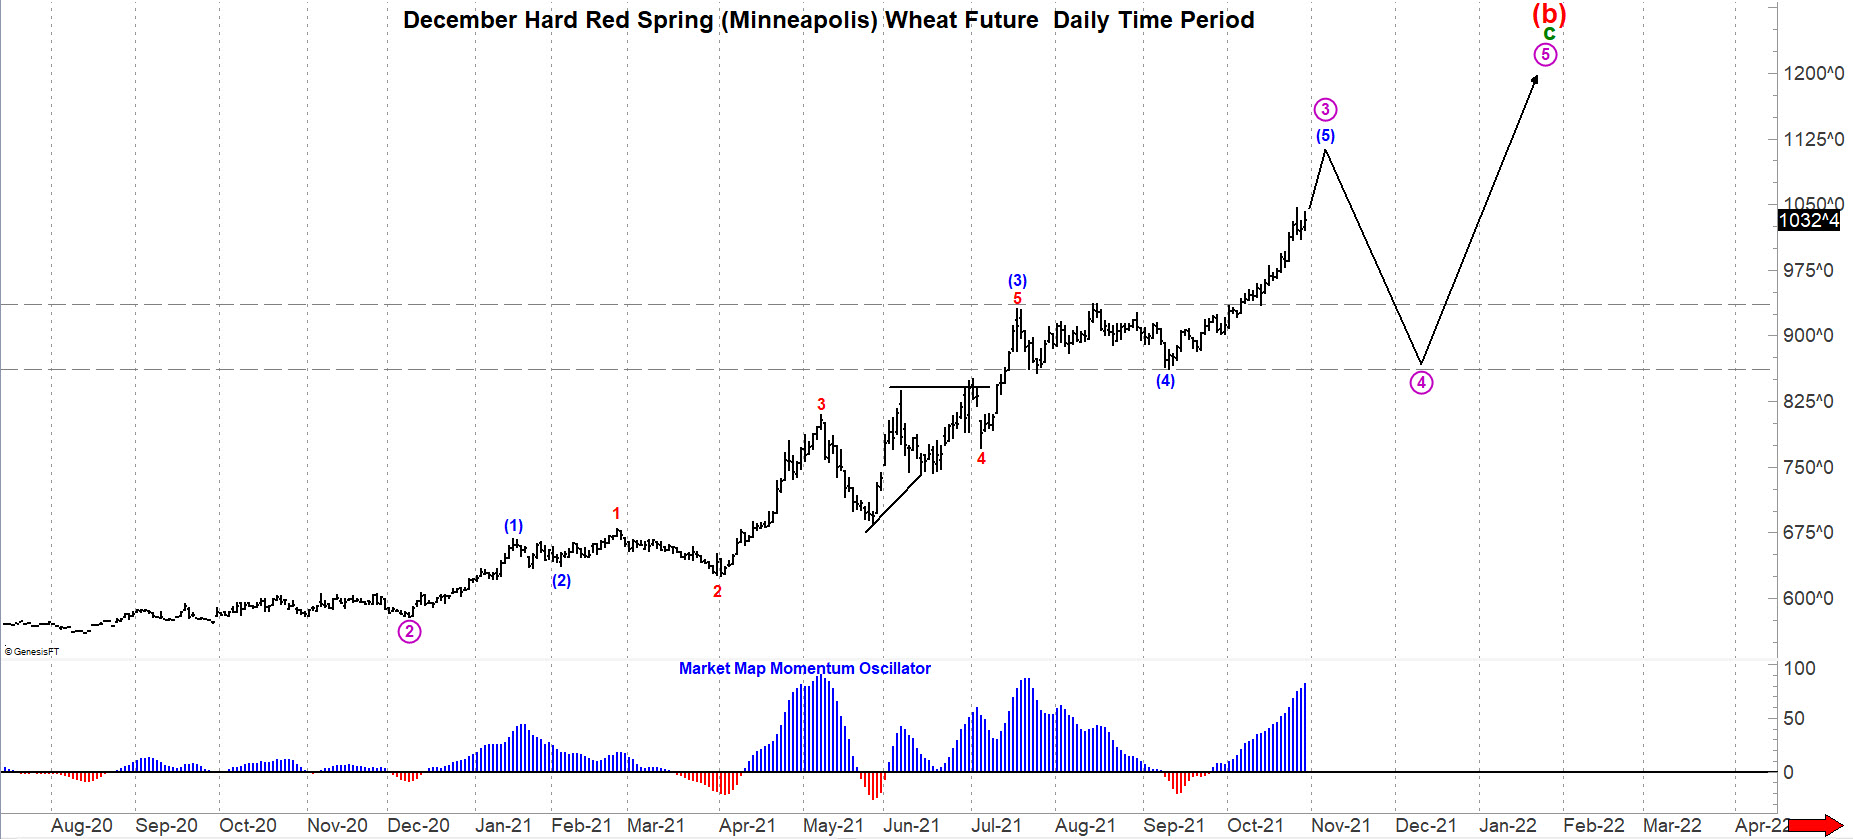 Spring Wheat Futures Chart